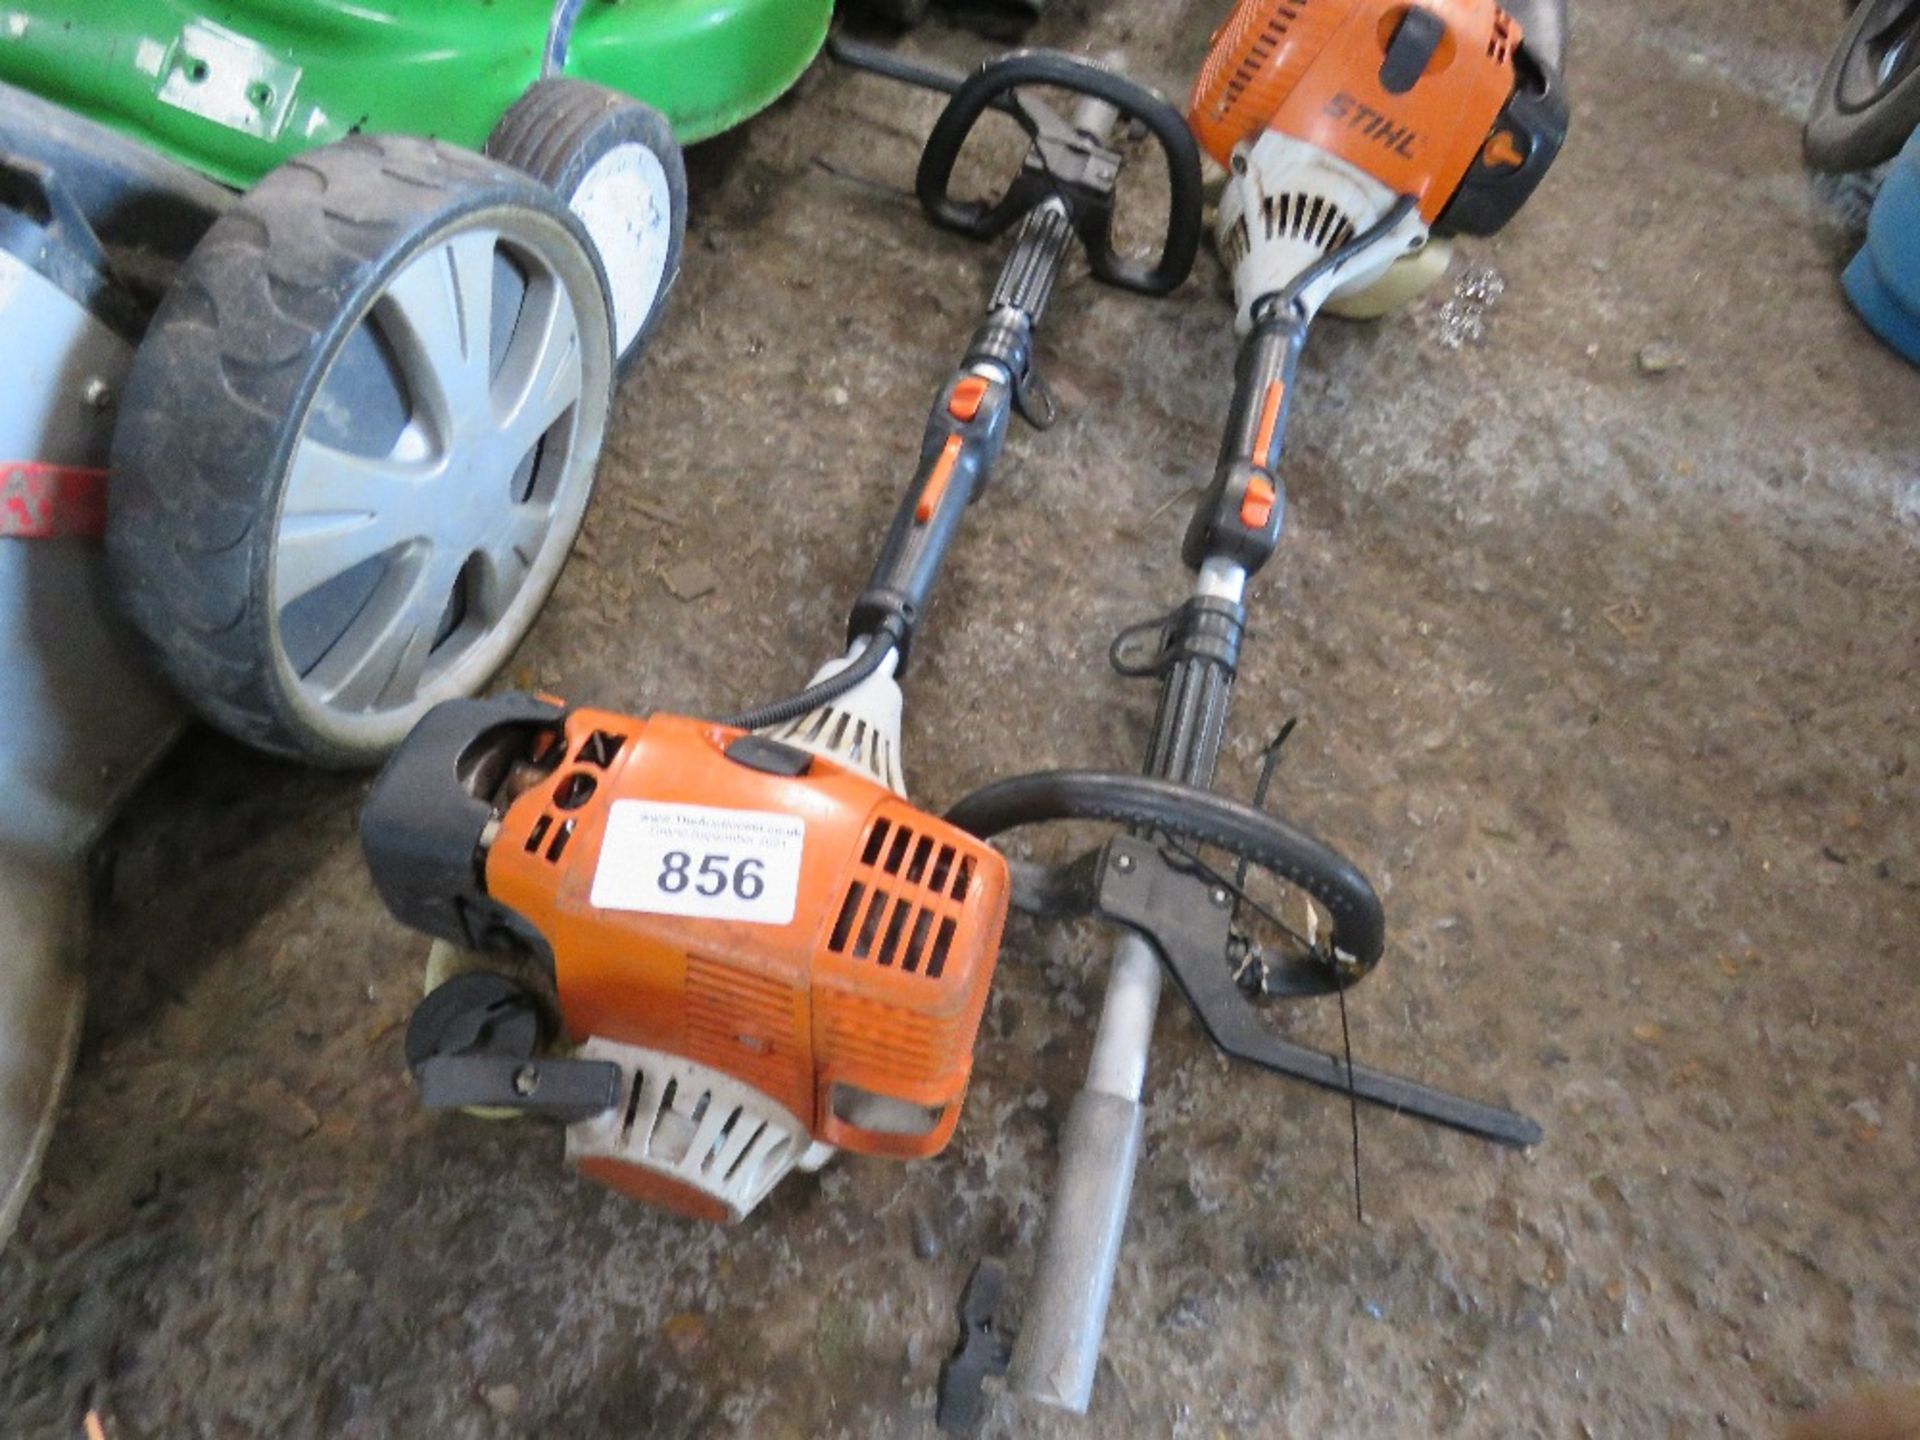 2 X STIHL MULTI TOOL POWER HEADS. UNTESTED, CONDITION UNKNOWN. NO VAT ON HAMMER PRICE. - Image 2 of 3